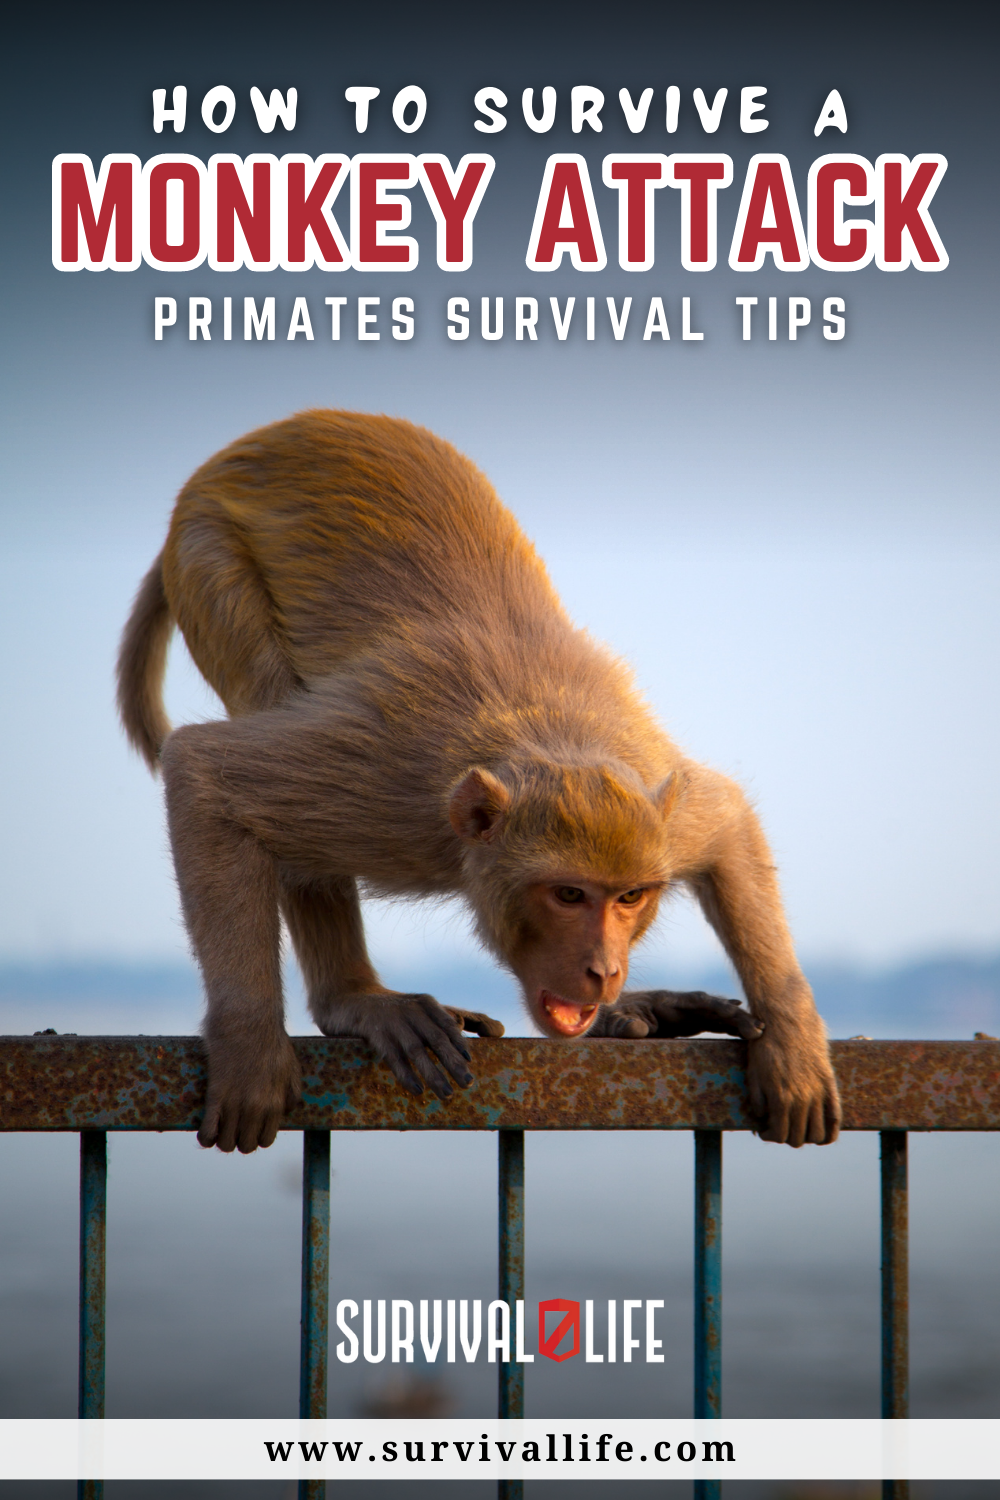 How to Survive a Monkey Attack